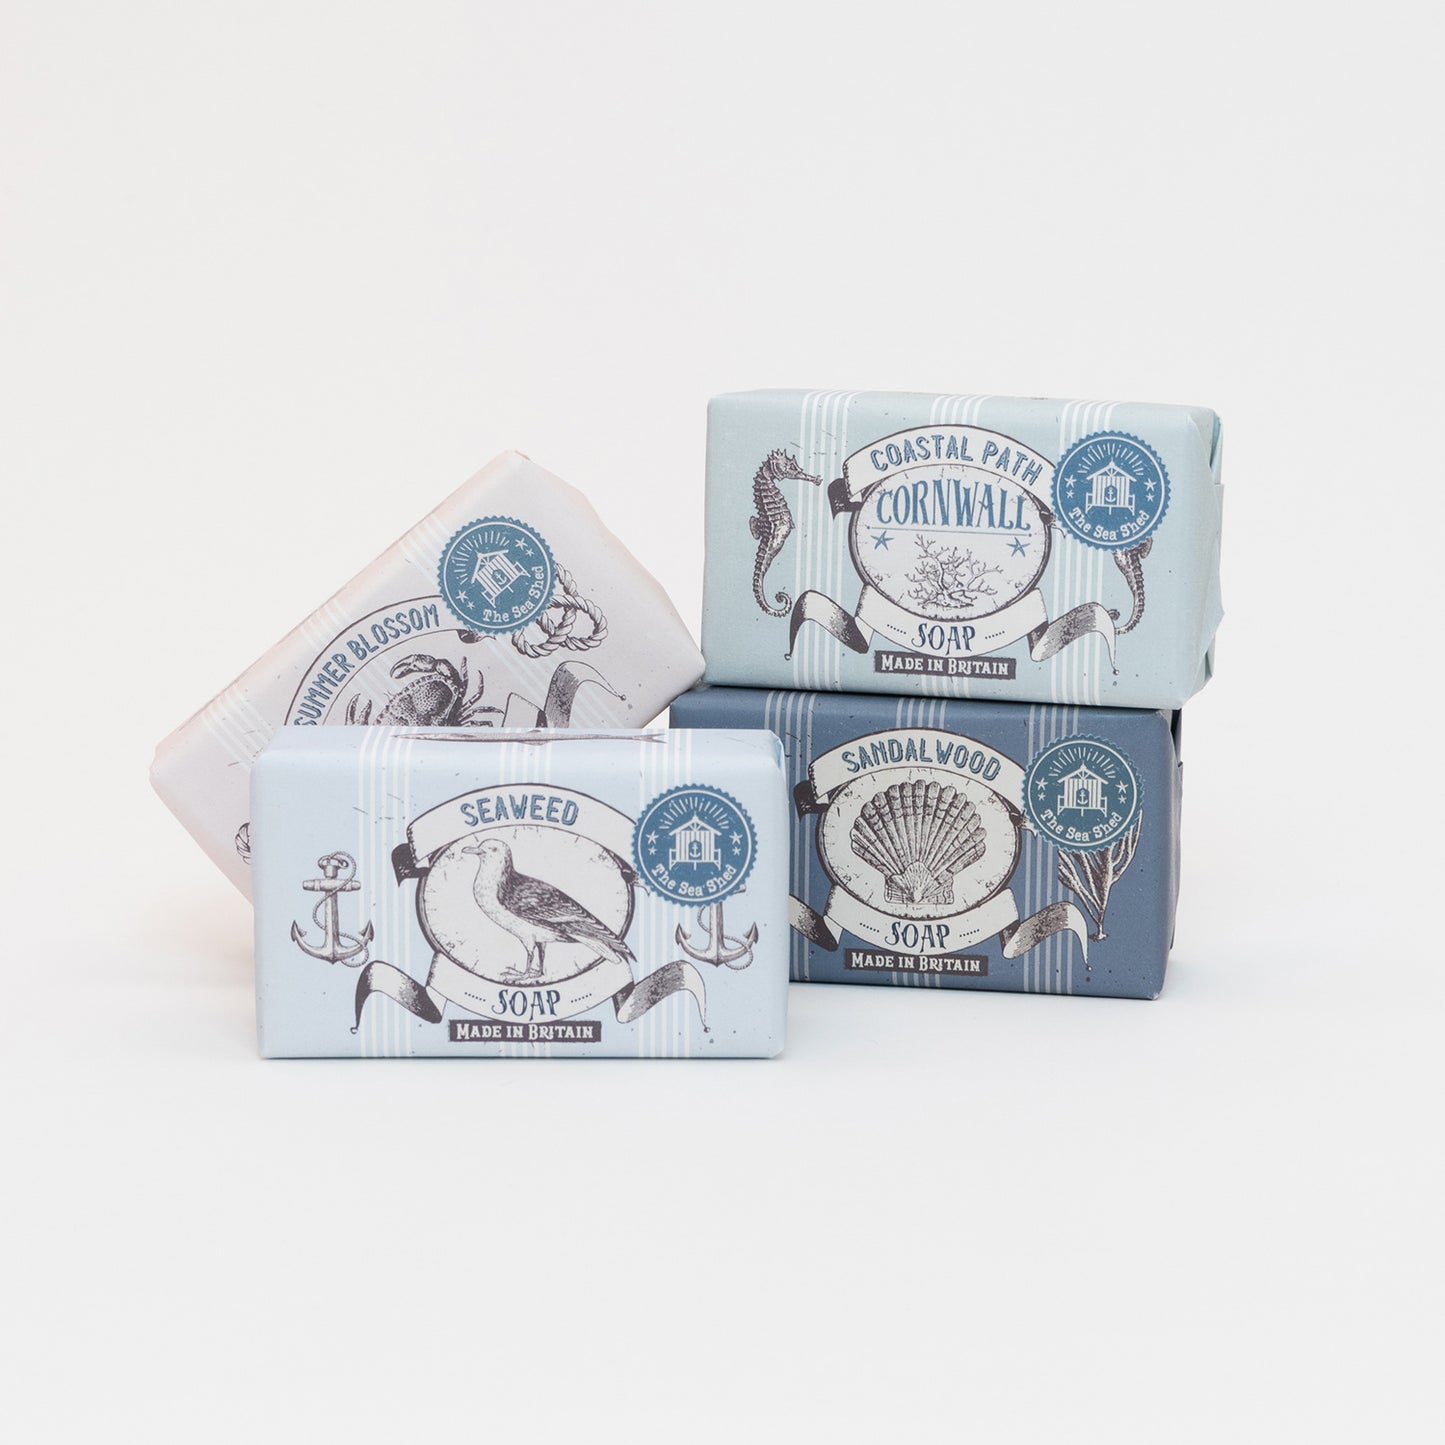 Four variants of Cornish soap stacked on top of each other on a white background: Seaweed, Sandalwood, Coastal Path, and Summer Blossom.